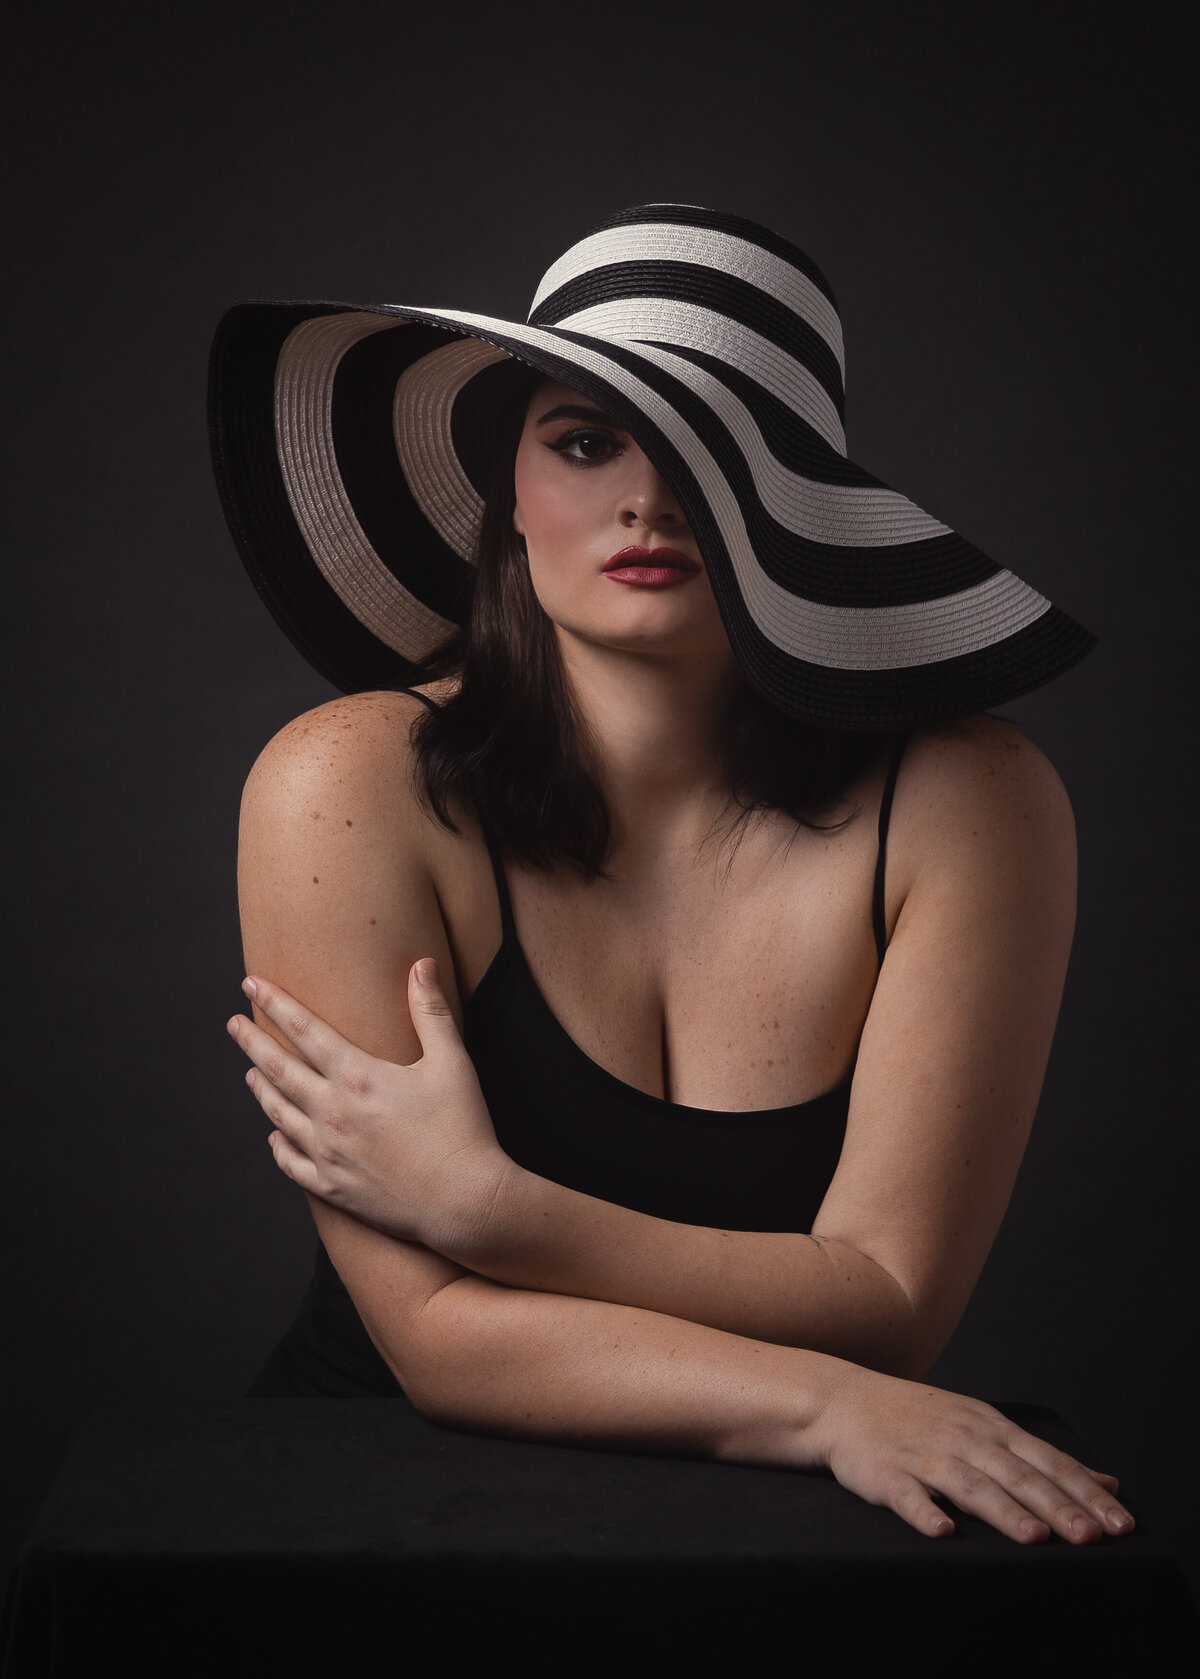 woman in black top with a black and white striped hat resting hands elegantly on a studio surface